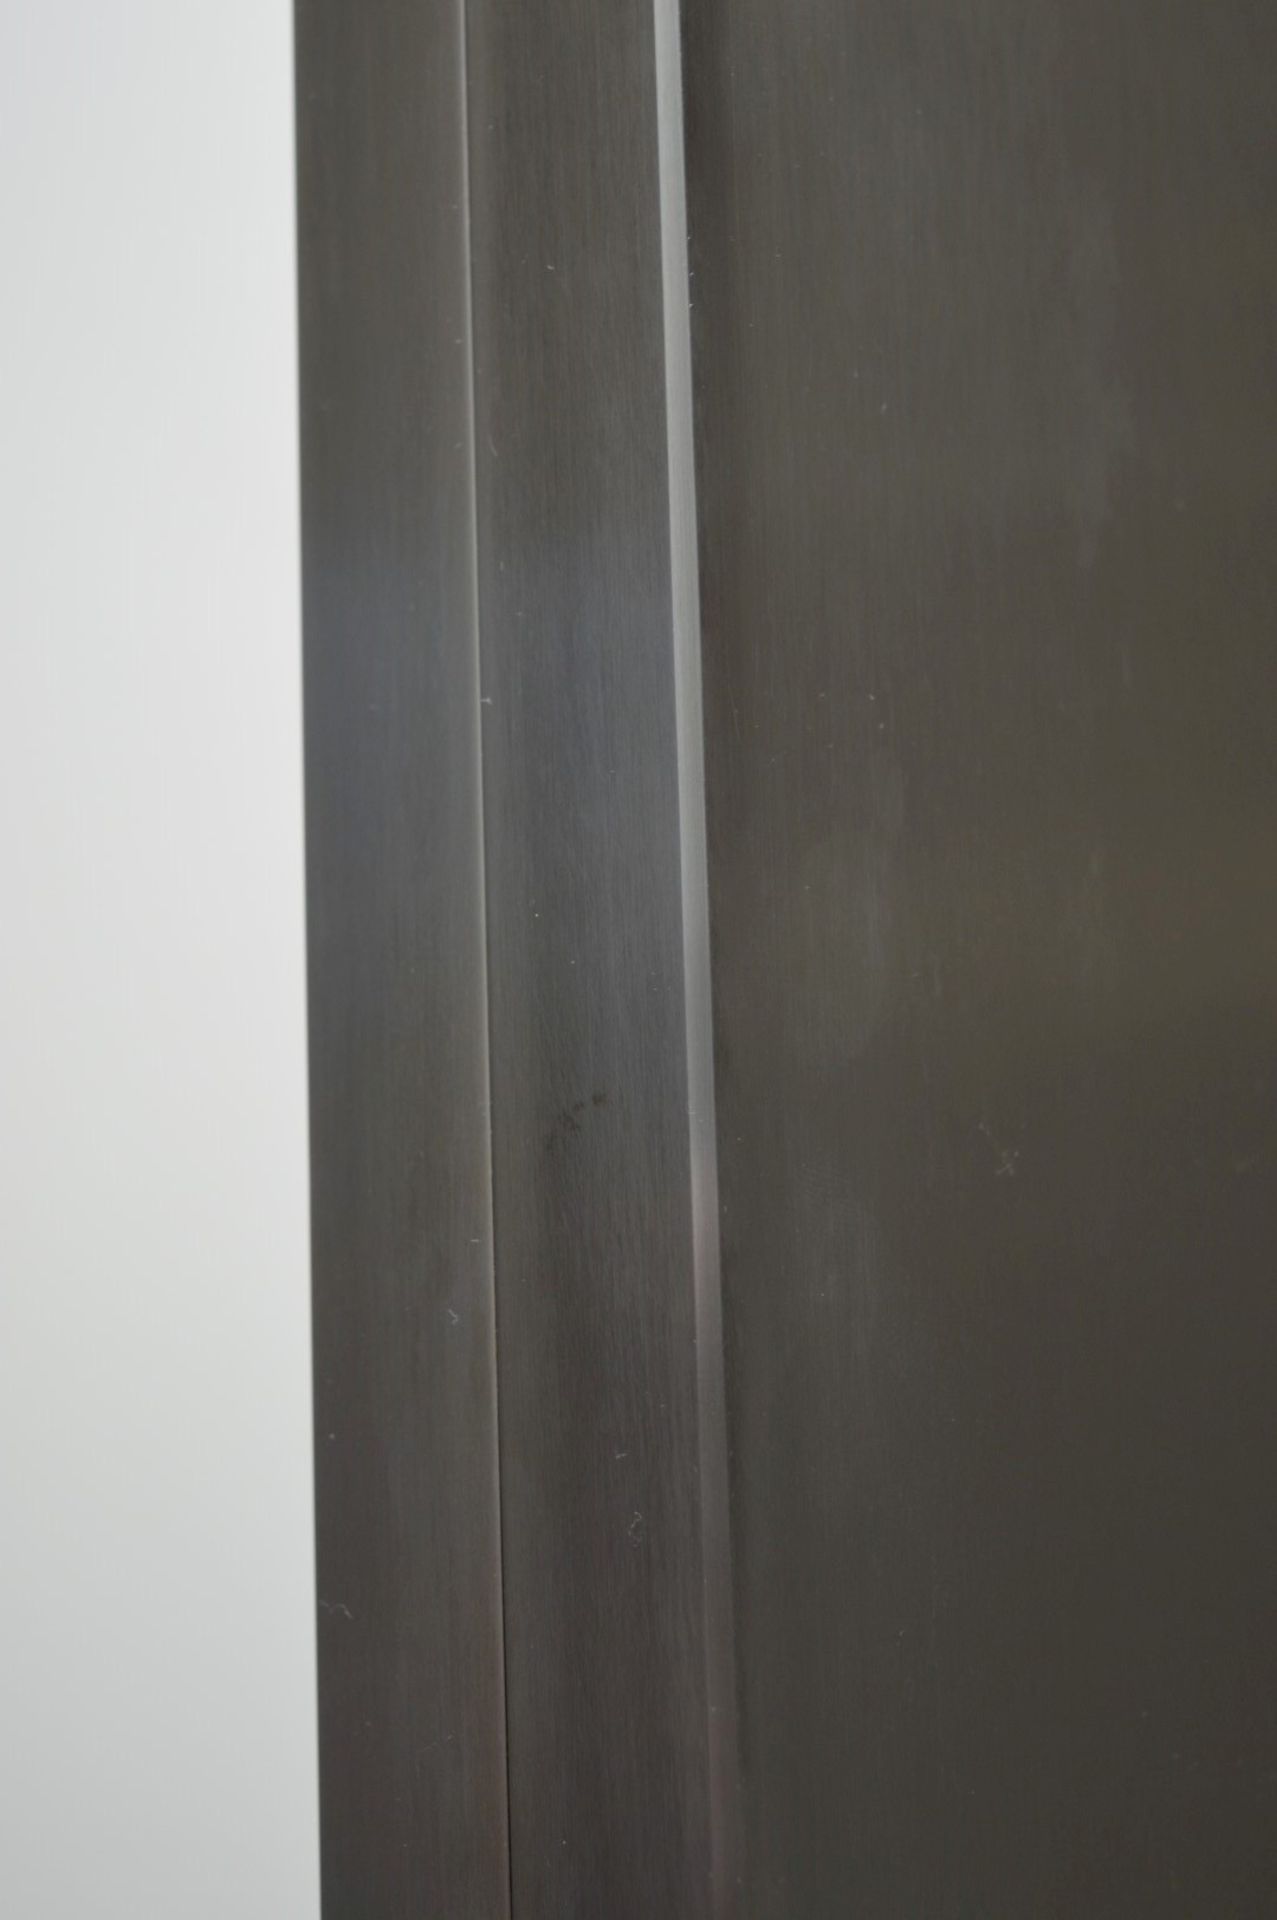 2 x Bespoke Internal Doors With Stainless Steel Finish - Pair of - Large Size - Ideal For Interior - Image 10 of 10